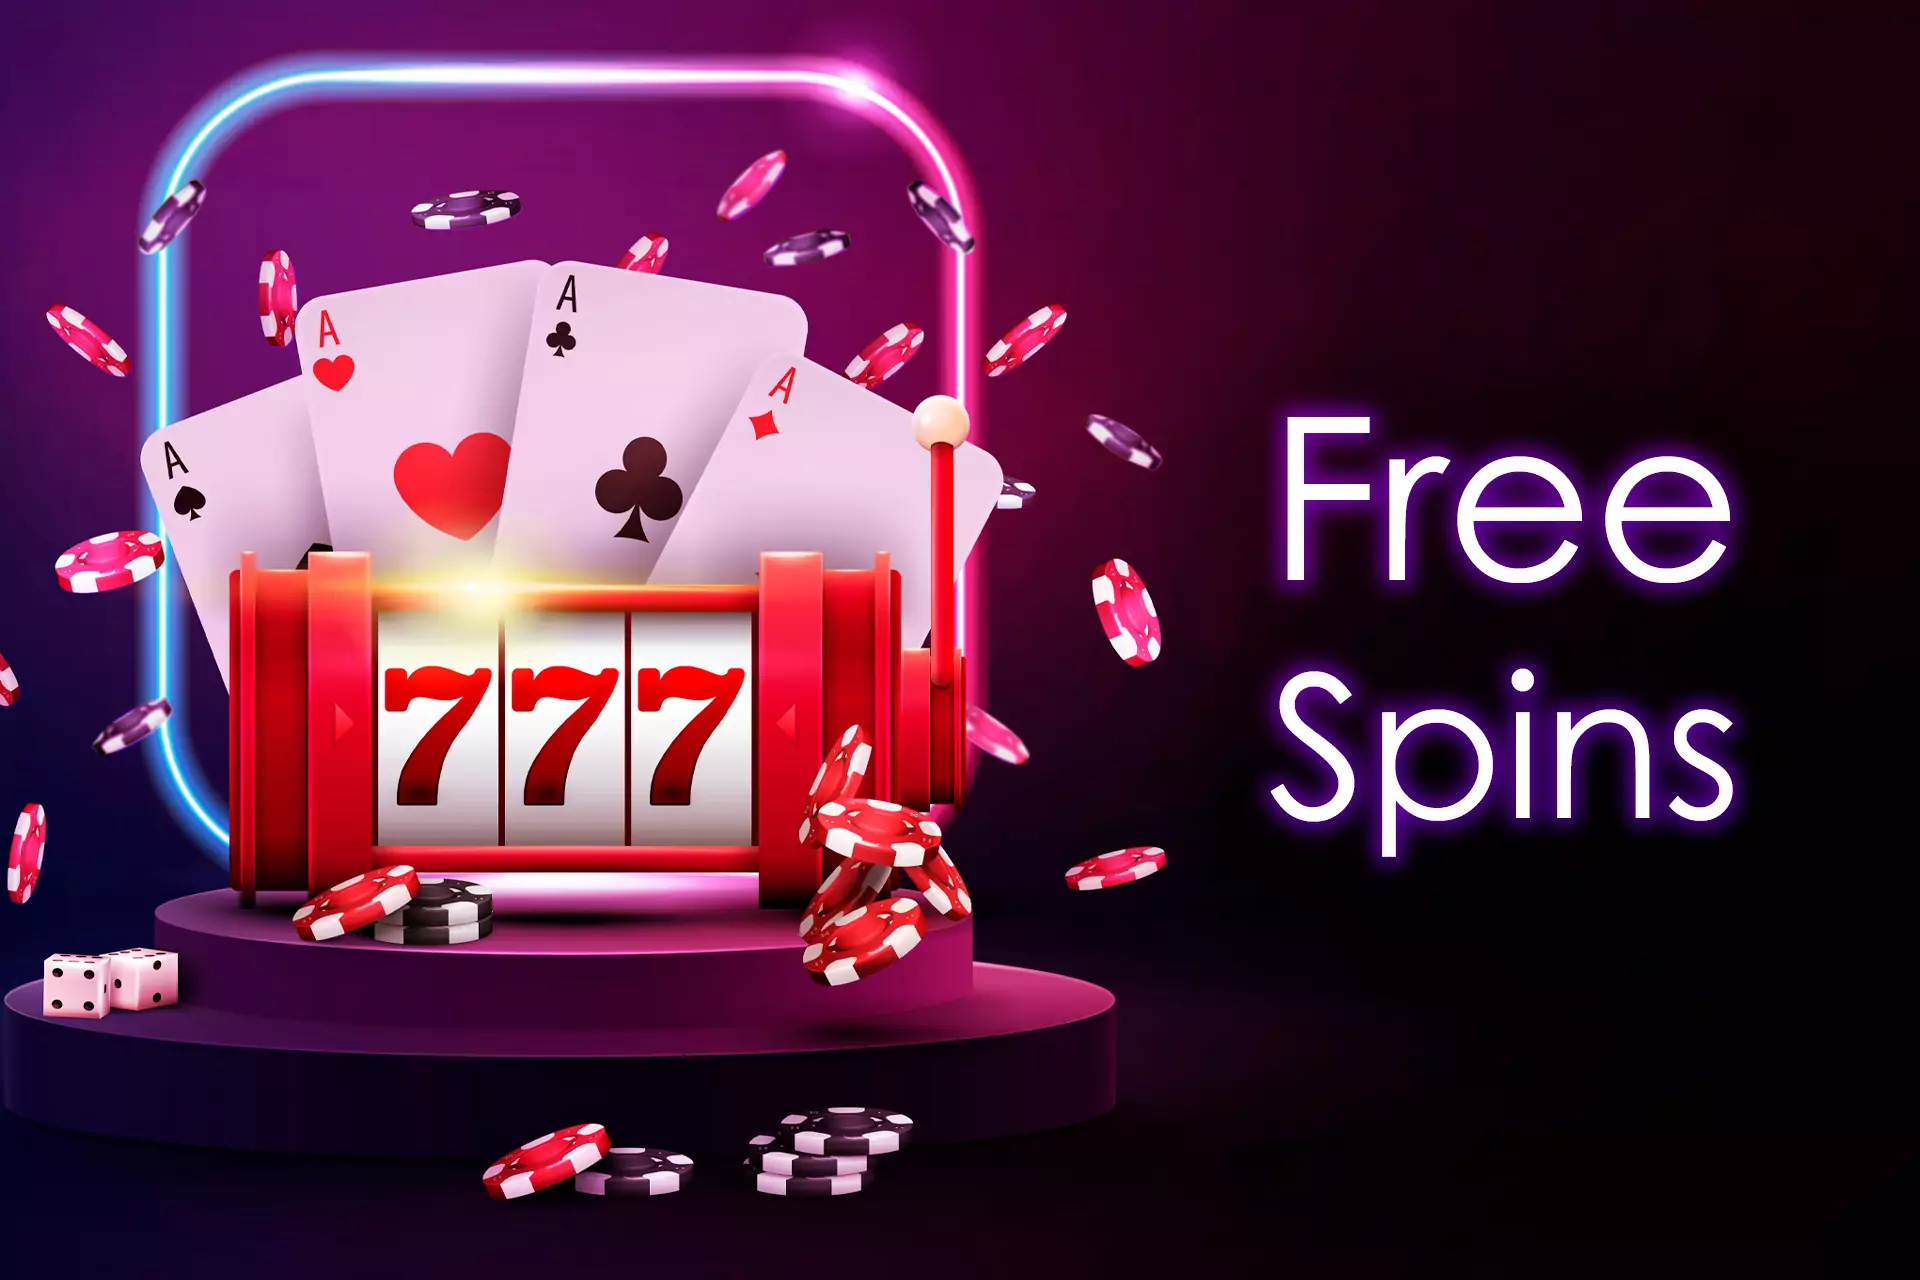 Free spins are usually a daily bonus that can be spent on playing online slots.